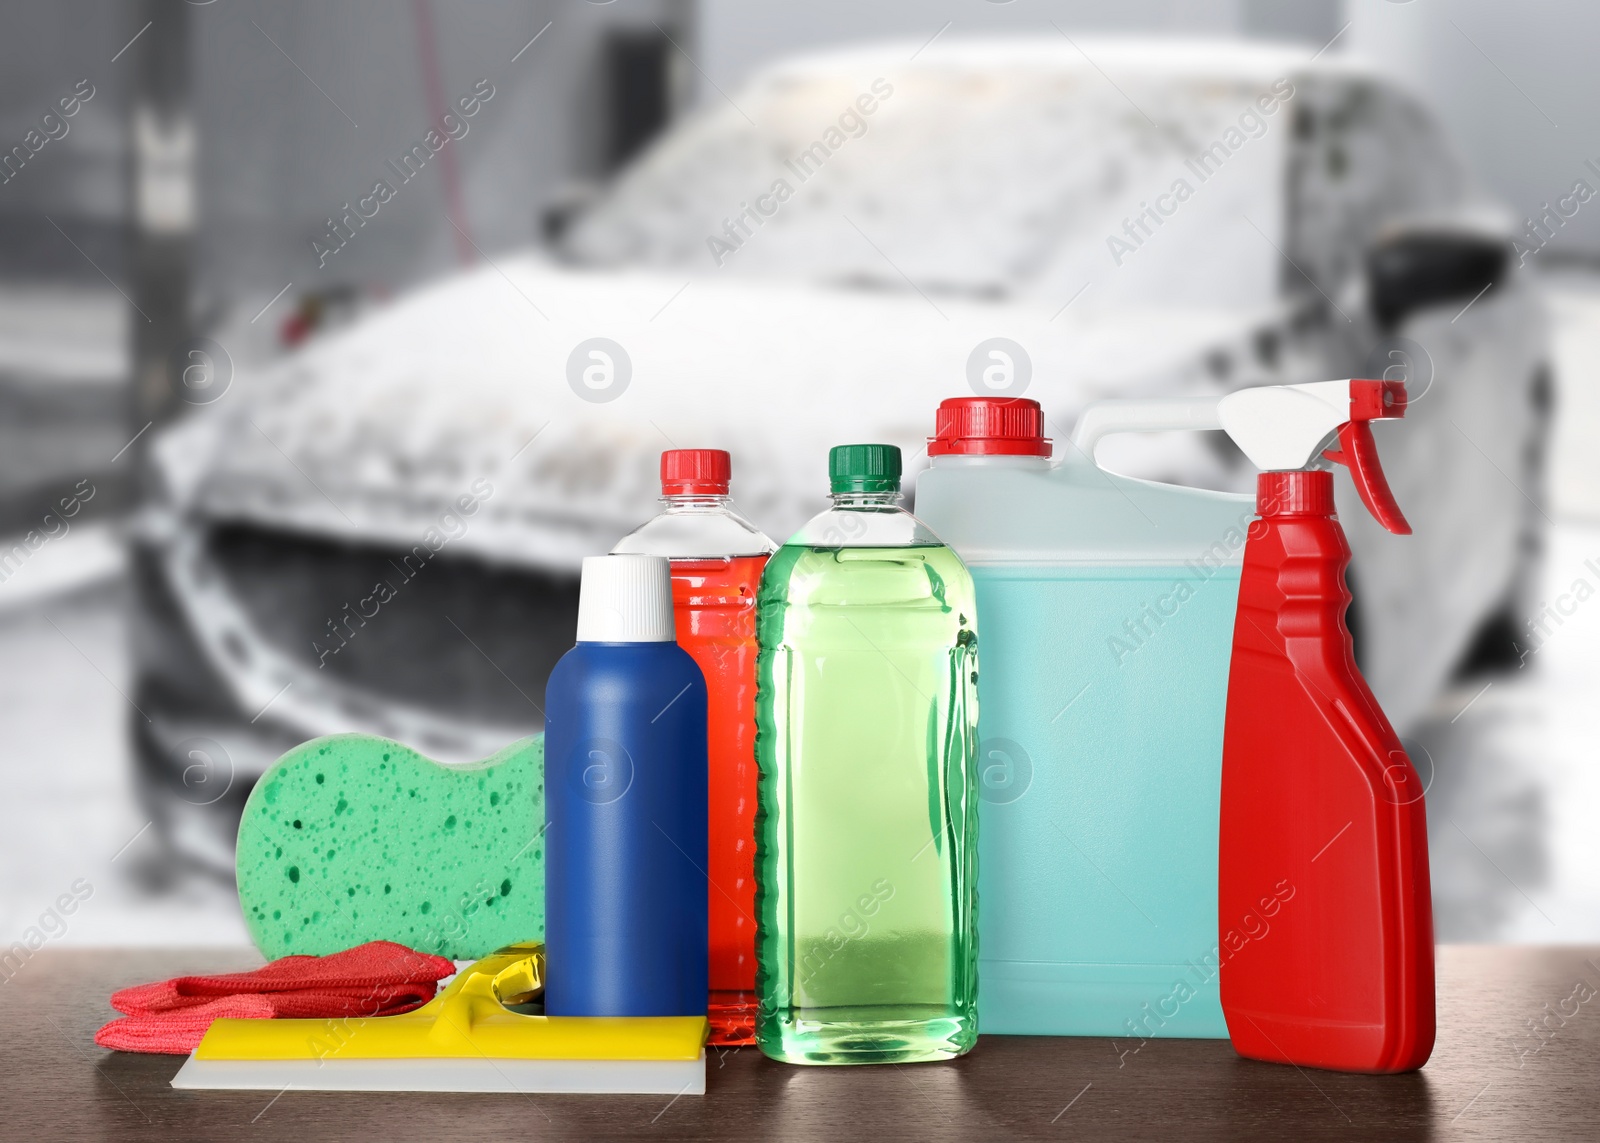 Image of Cleaning supplies on wooden surface at car wash